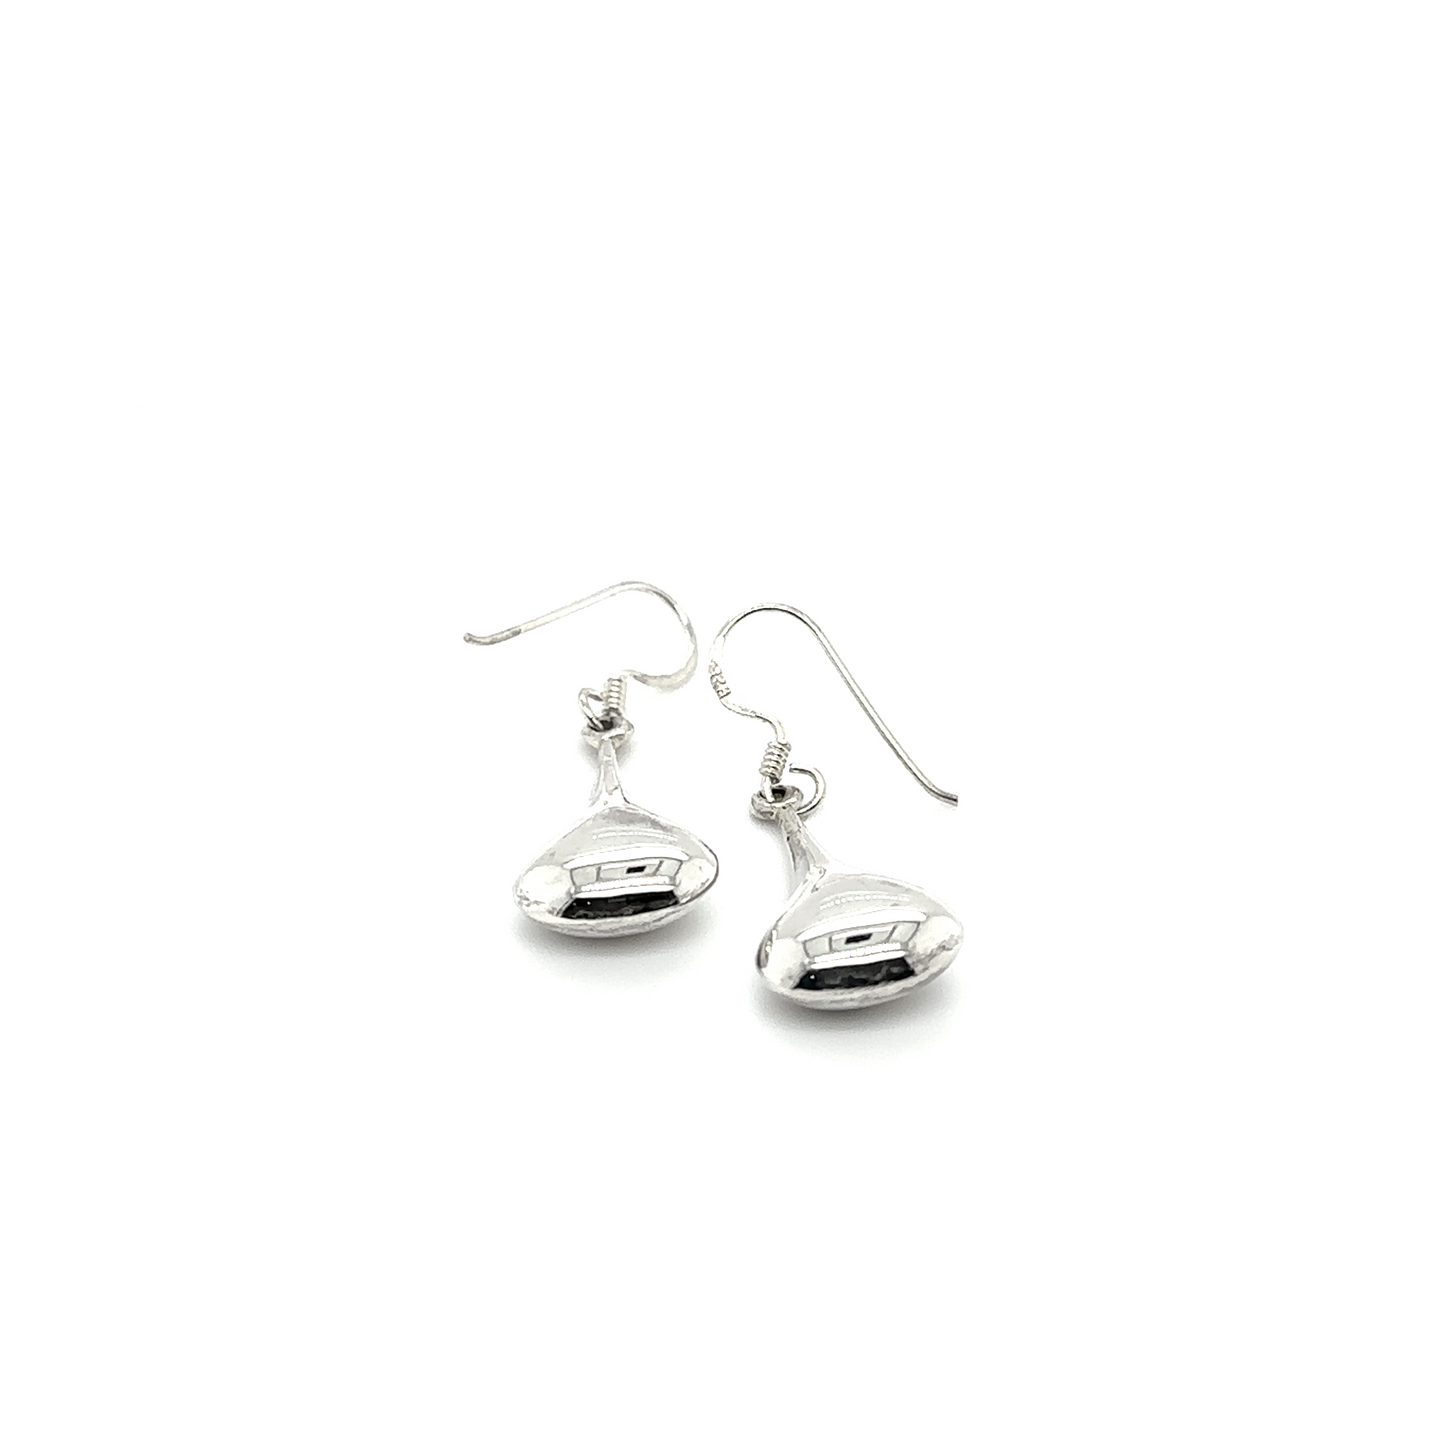 A pair of Simple Teardrop Earrings by Super Silver on a white background, showcasing elegant style.